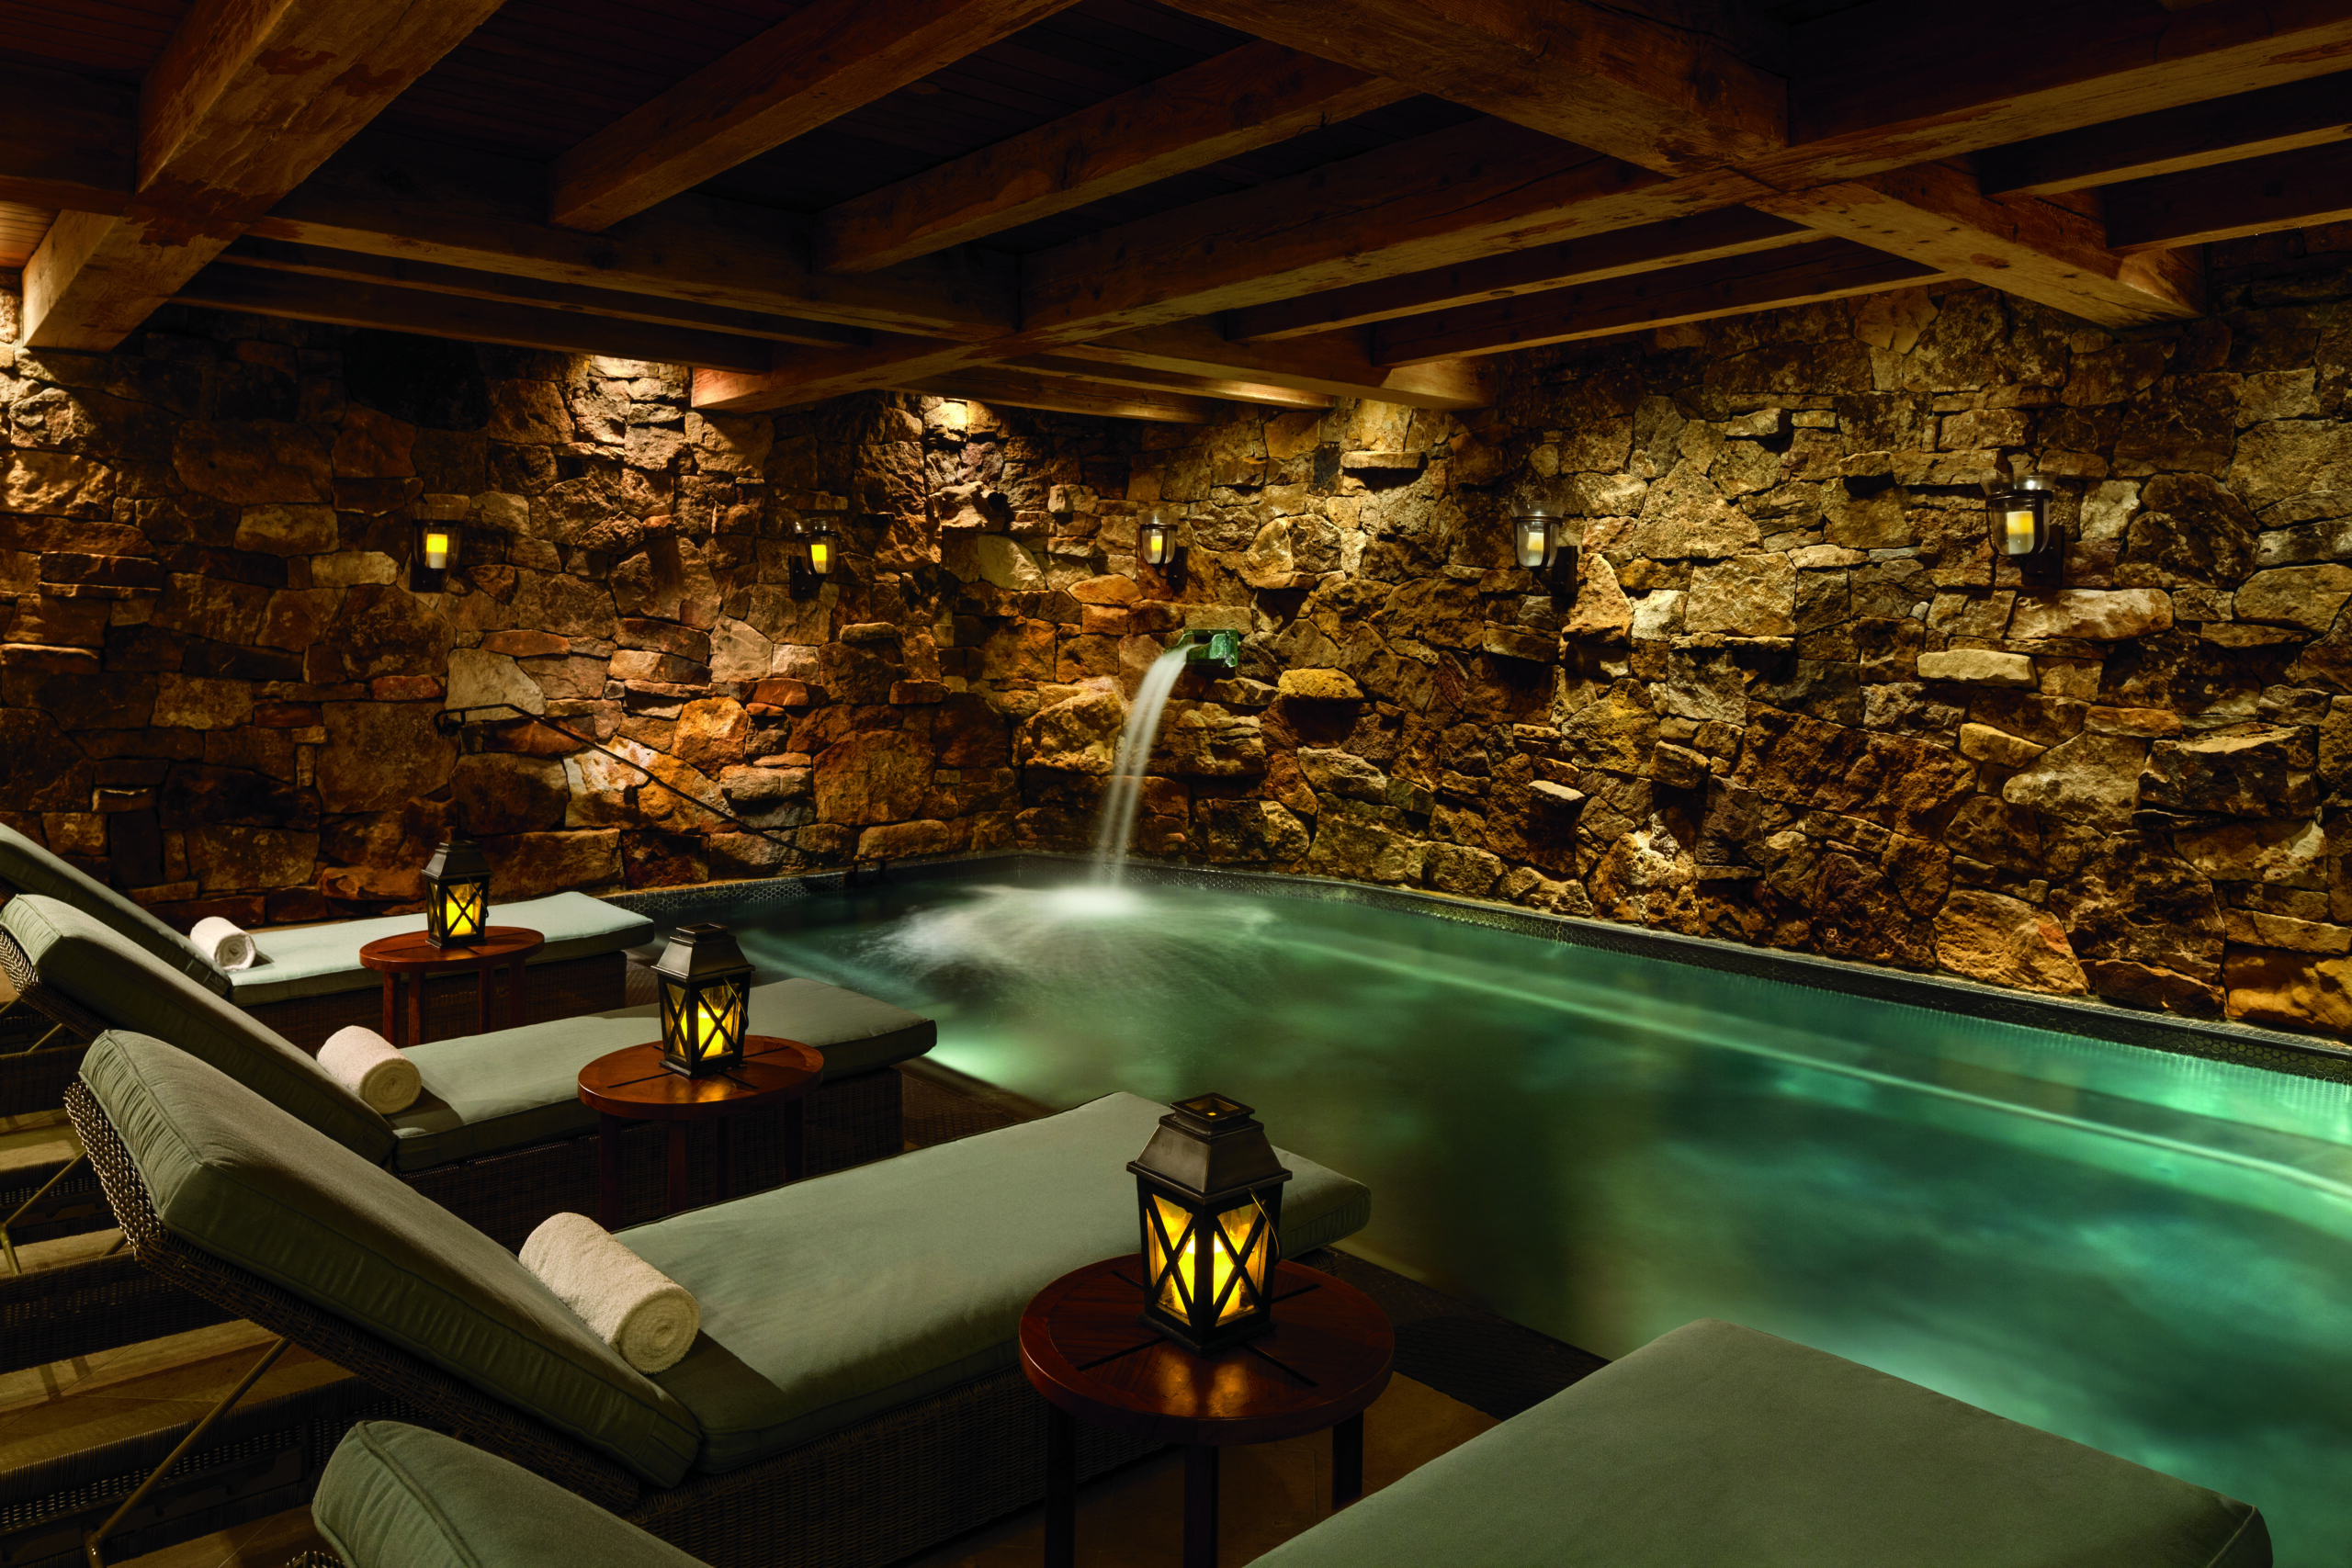 The stone-lined grotto in the sublevel spa does not mess around